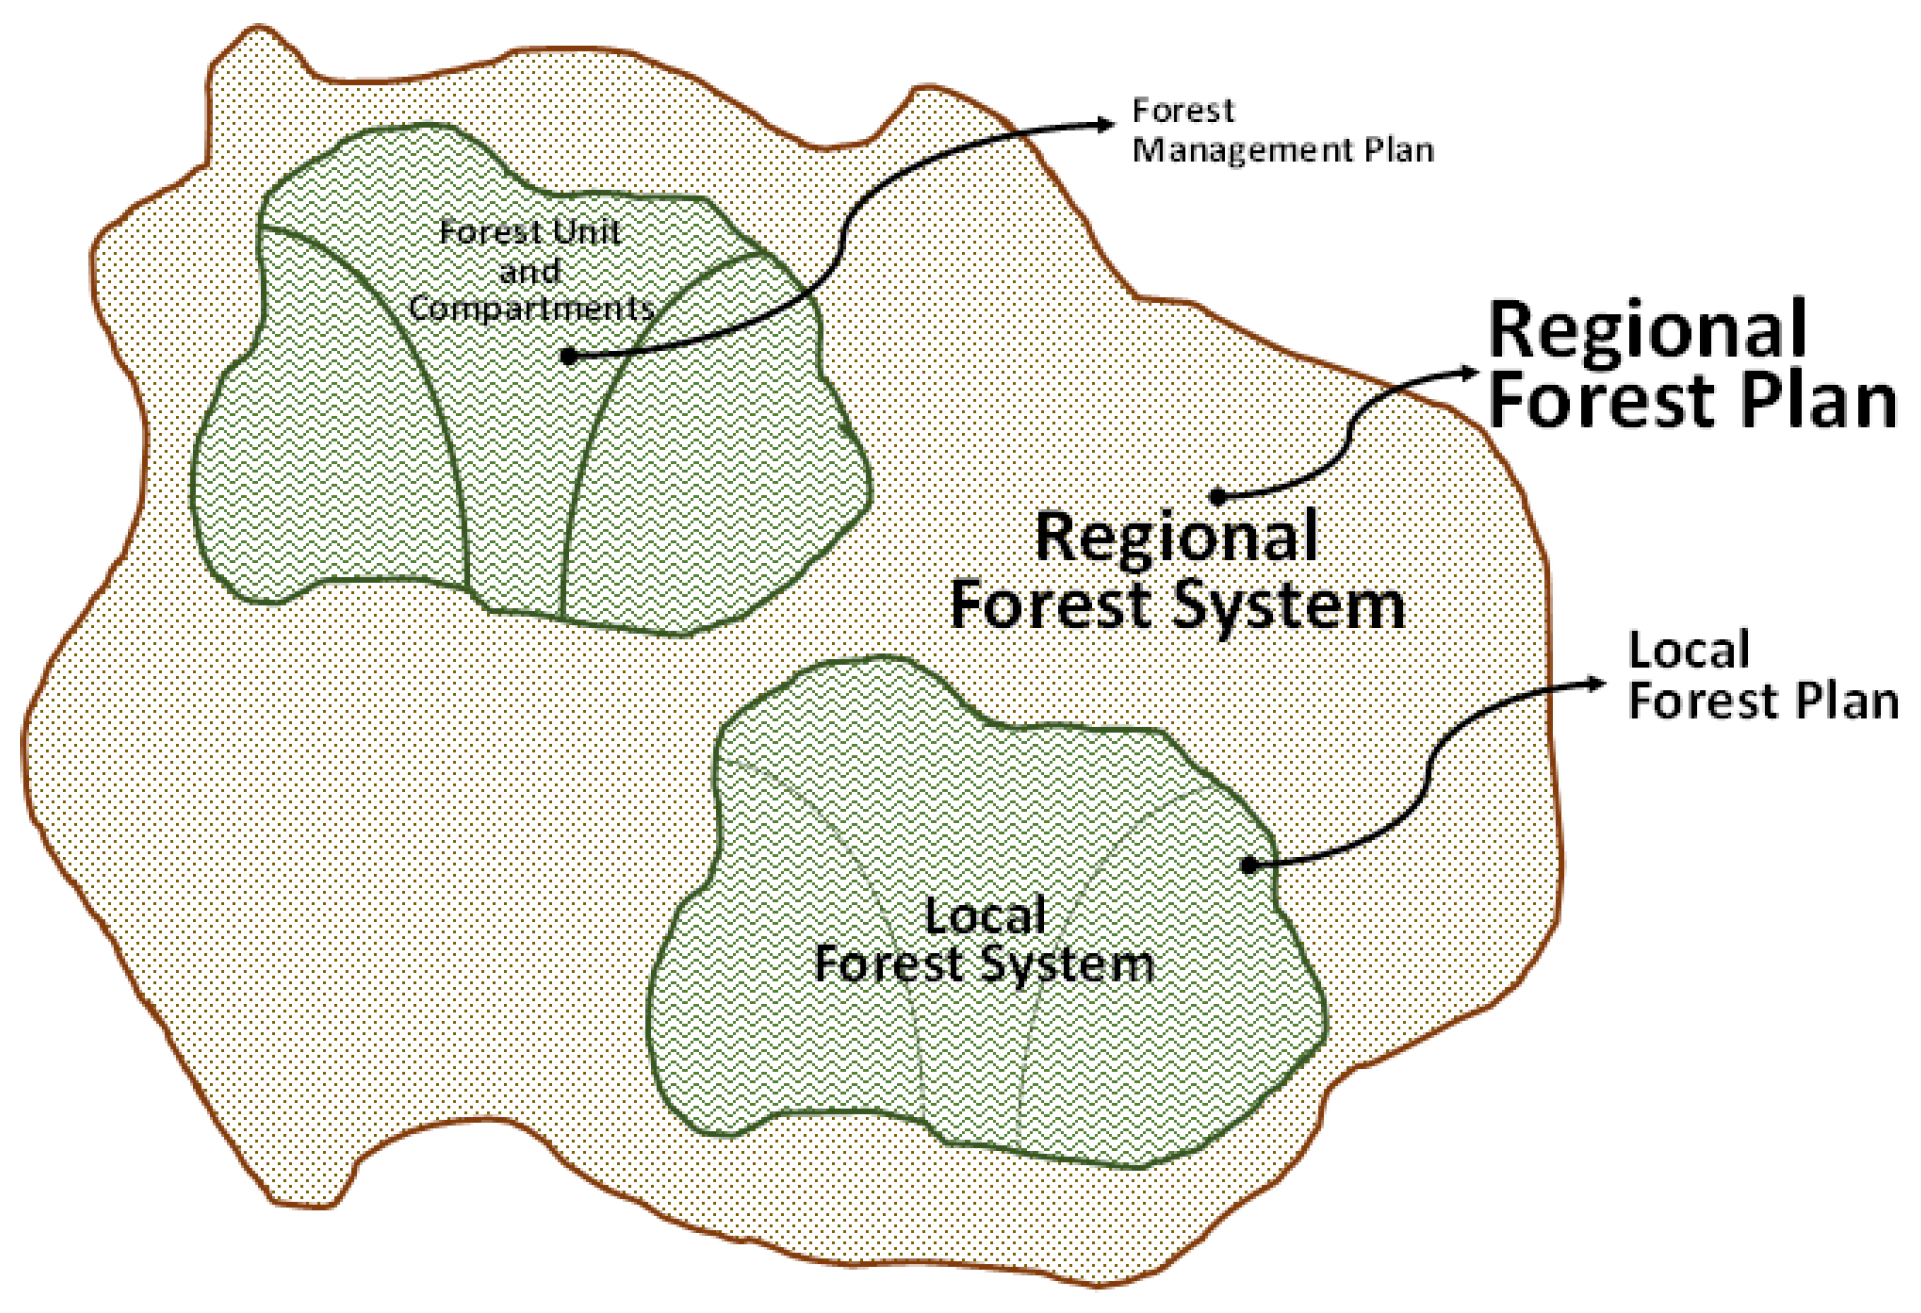 Ecosystem Services from Forest Landscapes: Broadscale